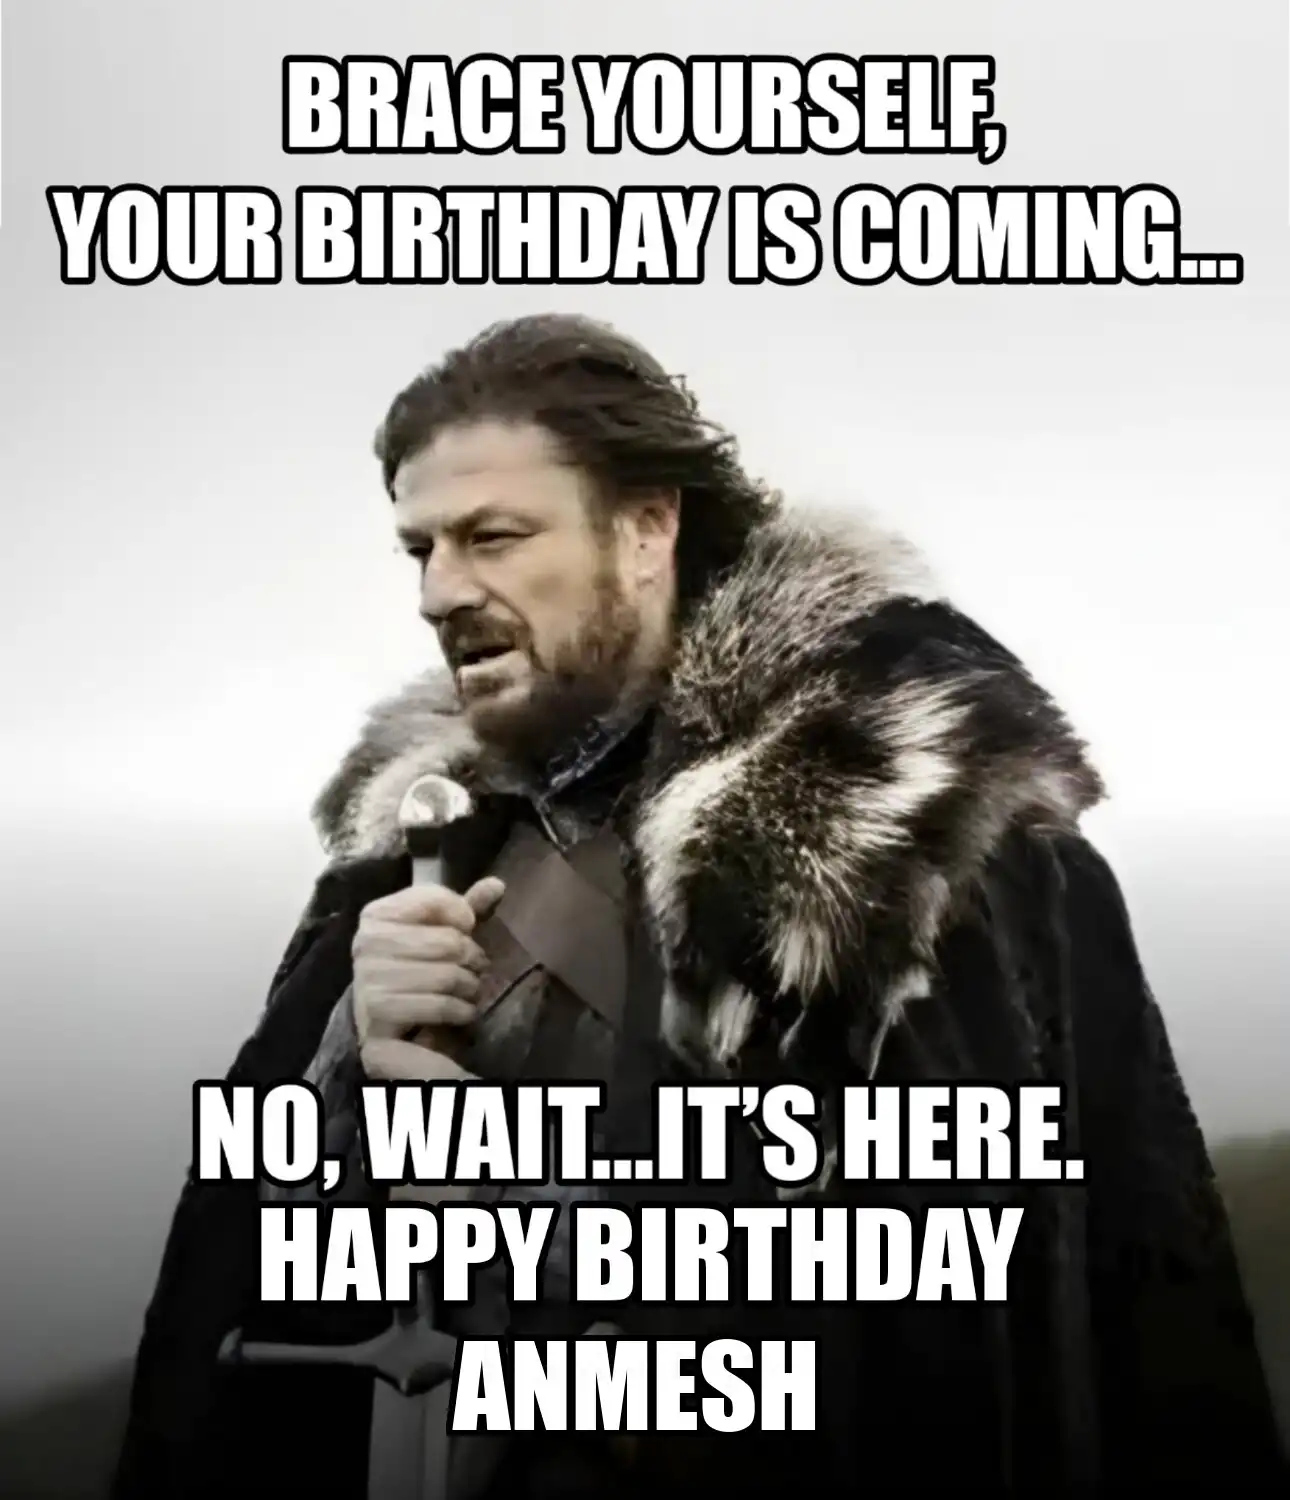 Happy Birthday Anmesh Brace Yourself Your Birthday Is Coming Meme